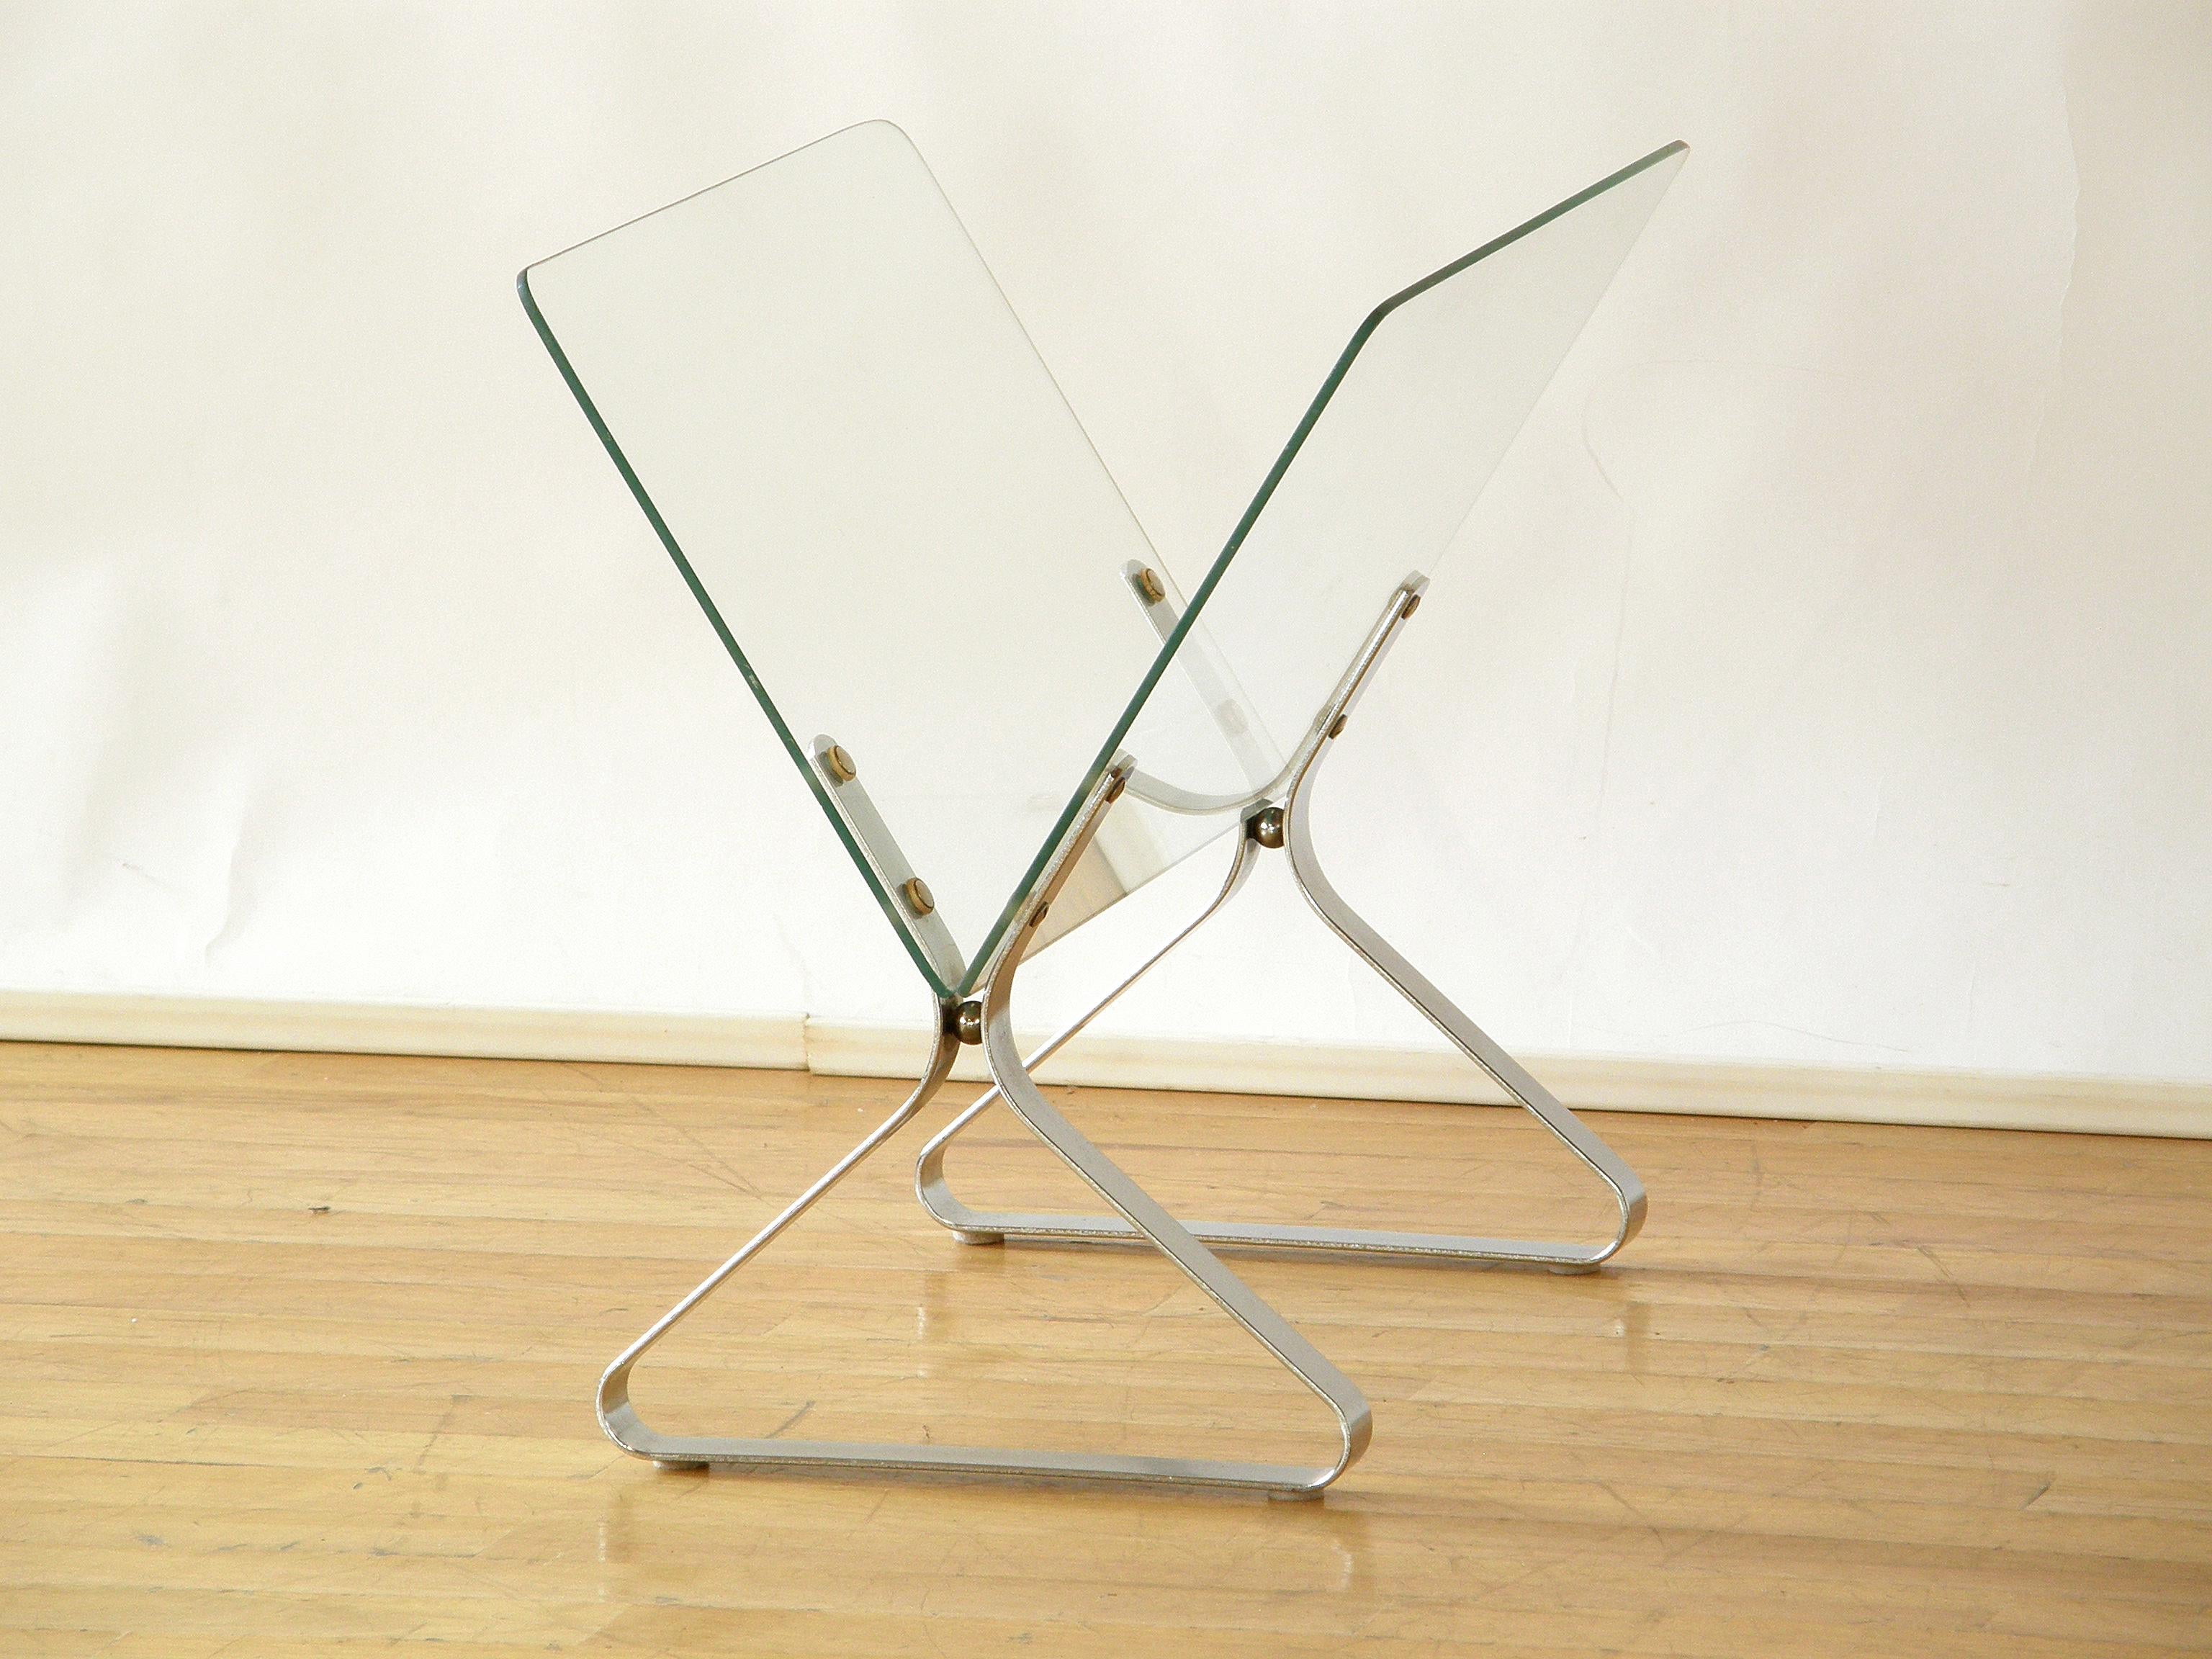 This circa 1970s, Minimalist magazine rack has glass plate sides and bent, chrome plated metal base pieces. The 